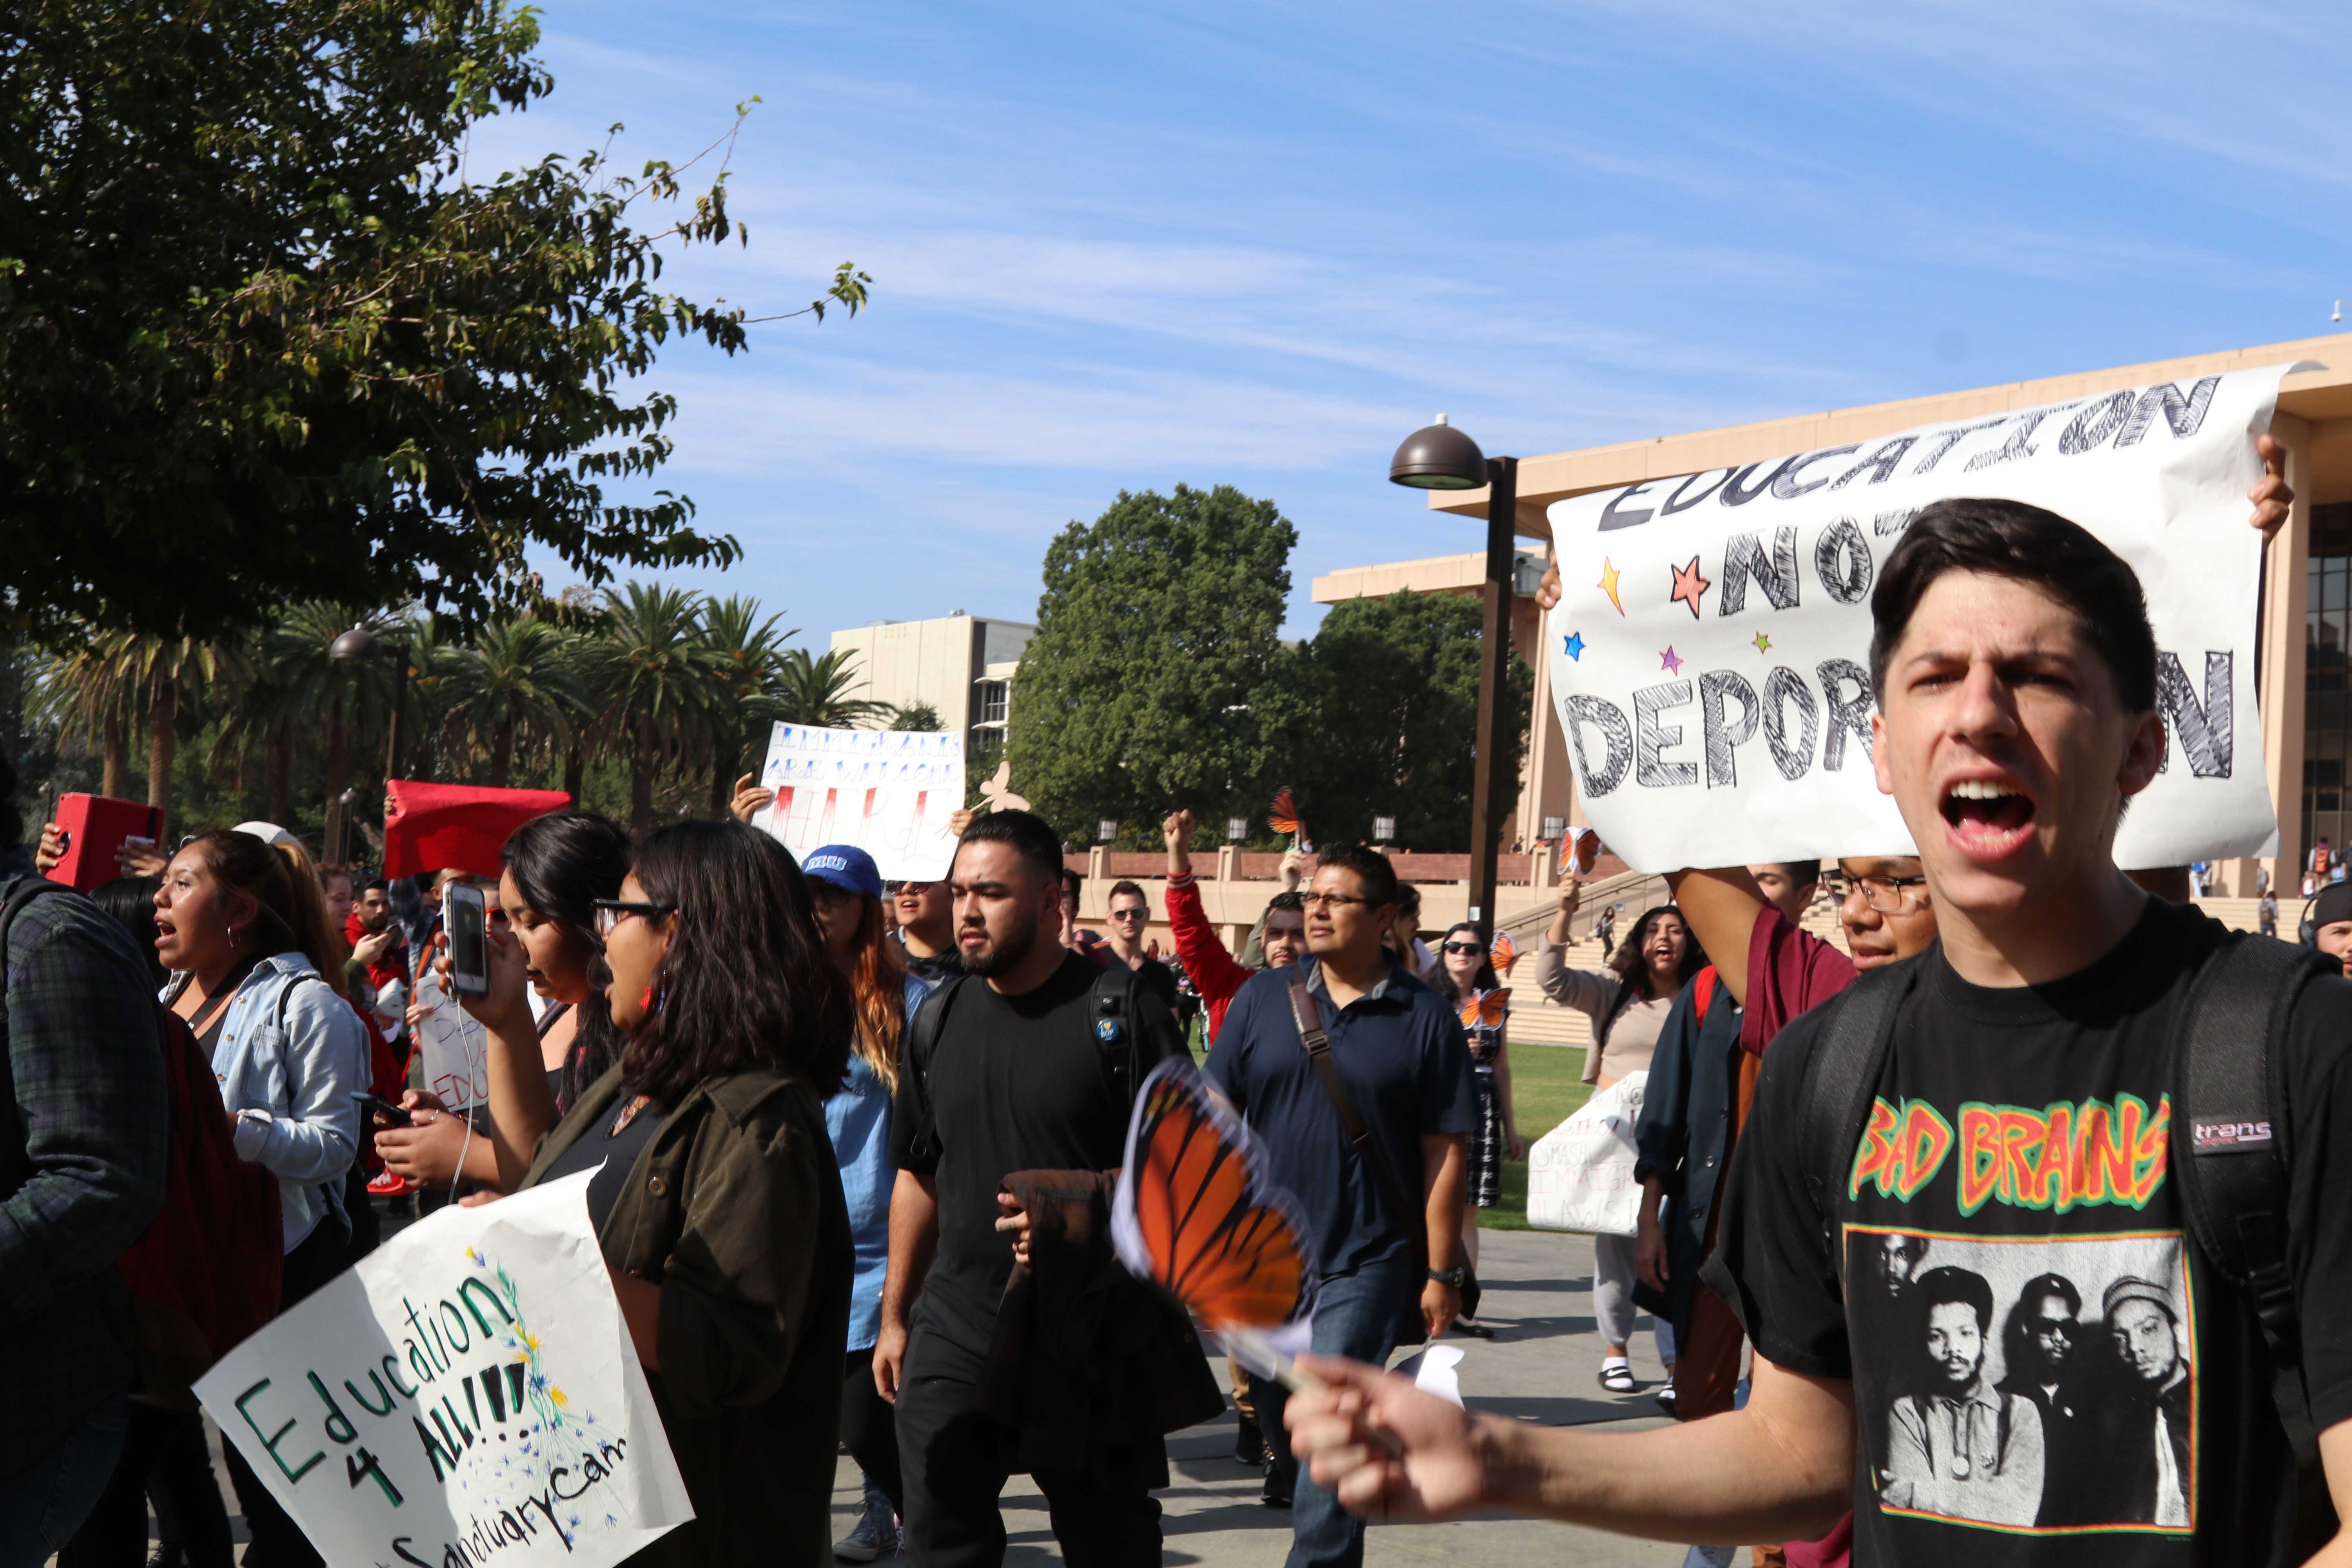 On+the+Oviatt+Lawn+students+march+holding+signs+that+say+education+not+deportation